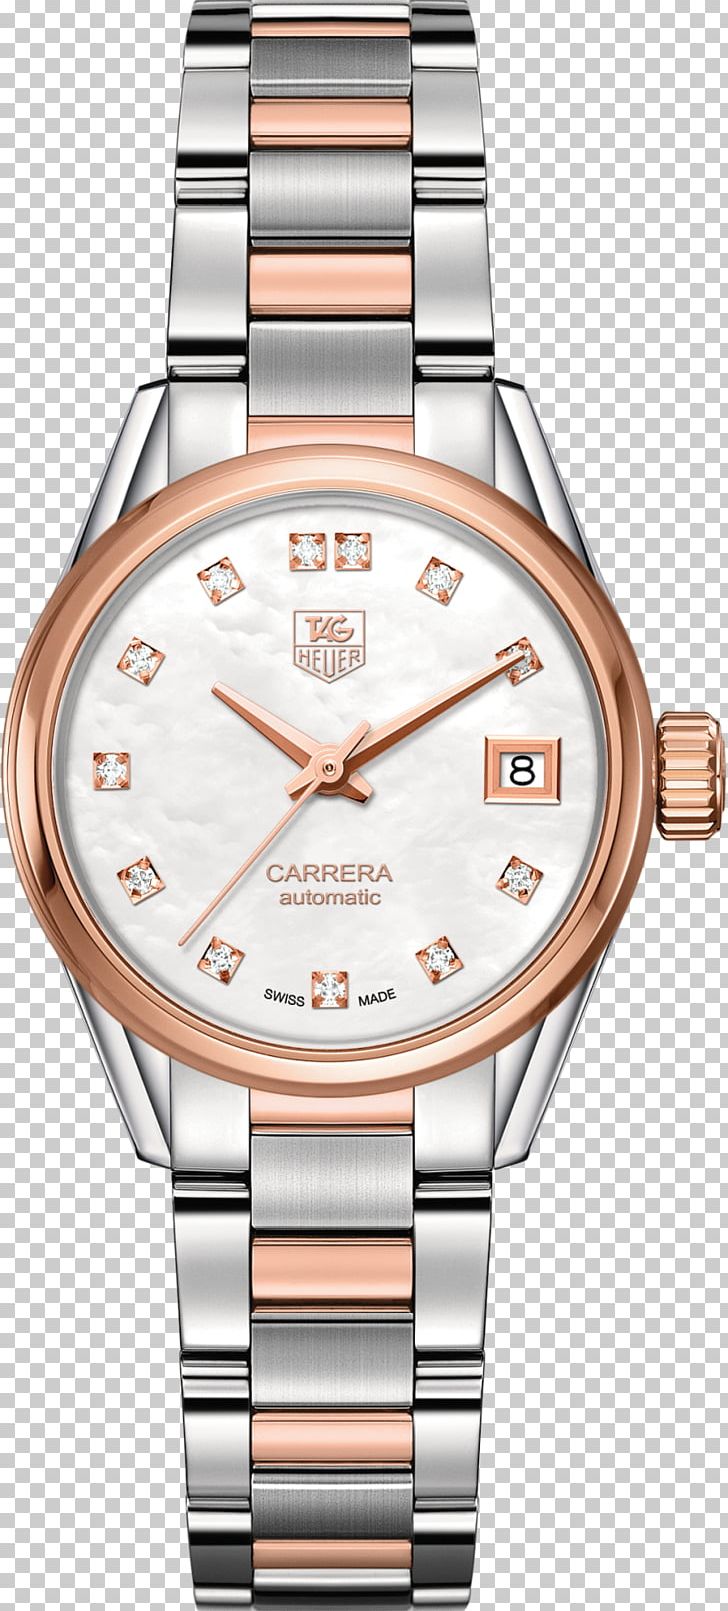 TAG Heuer Carrera Calibre 5 Automatic Watch TAG Heuer Aquaracer PNG, Clipart, Accessories, Automatic Watch, Brand, Brown, Chronograph Free PNG Download